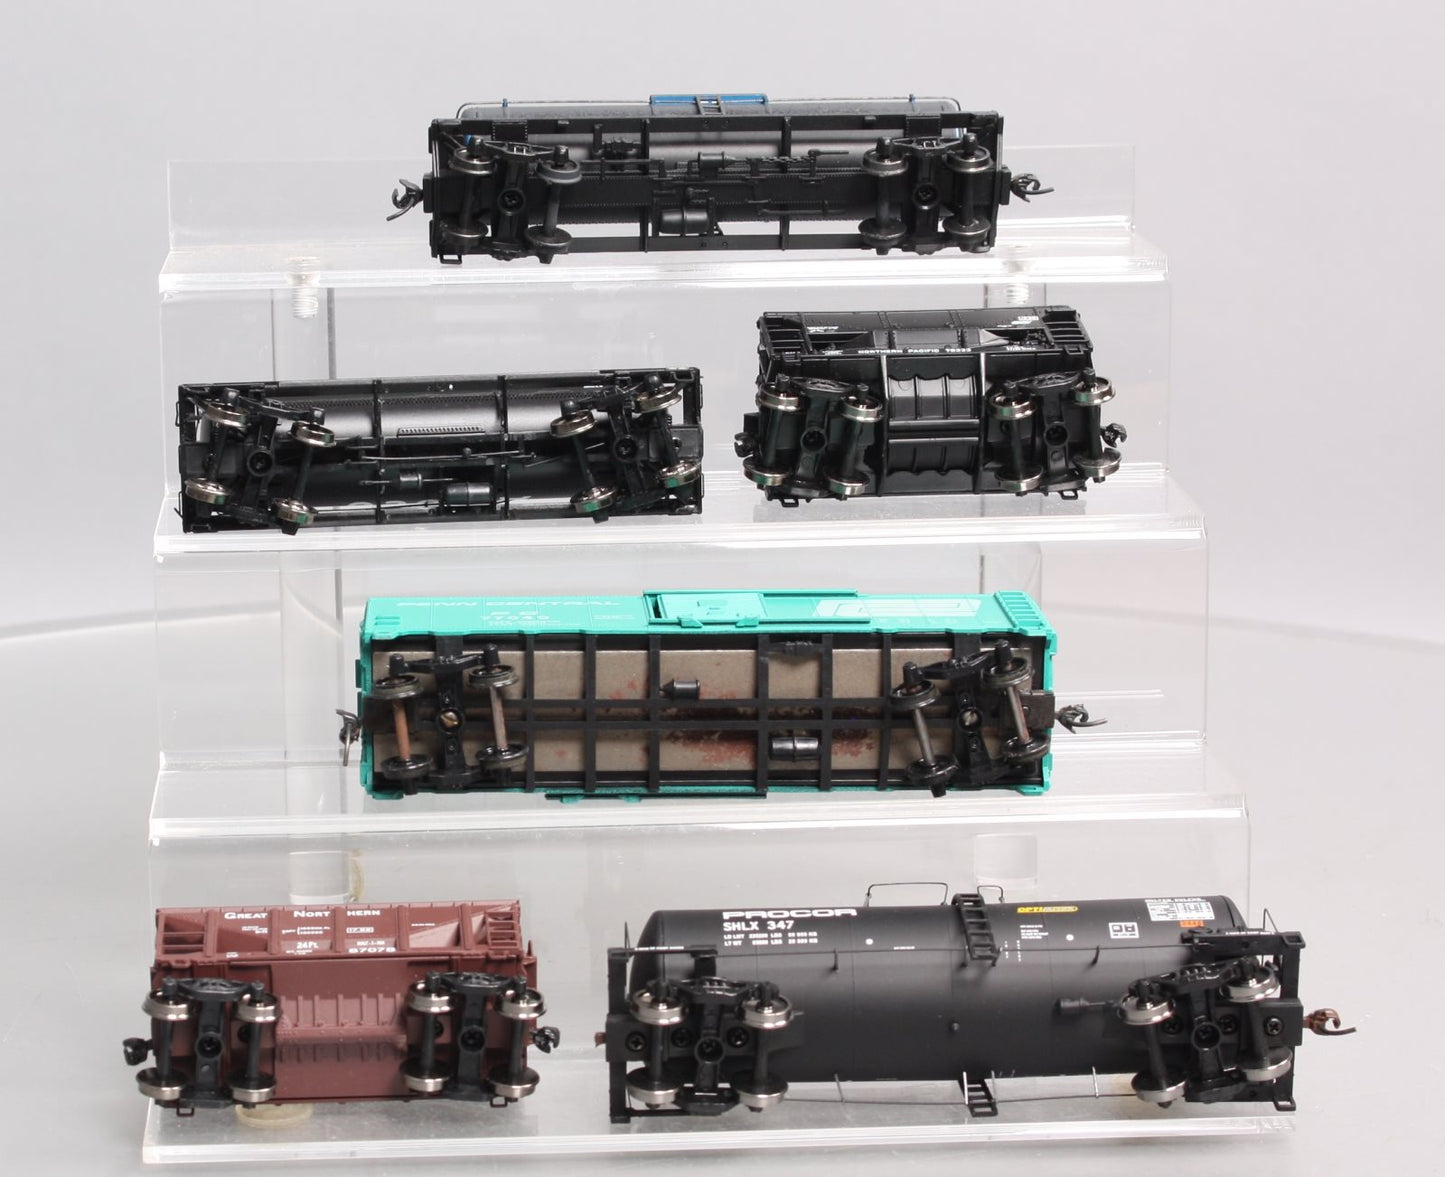 Walthers & Other HO Assorted Freight Cars: 1693, 77040, 347, 87078, 78333 [6] VG